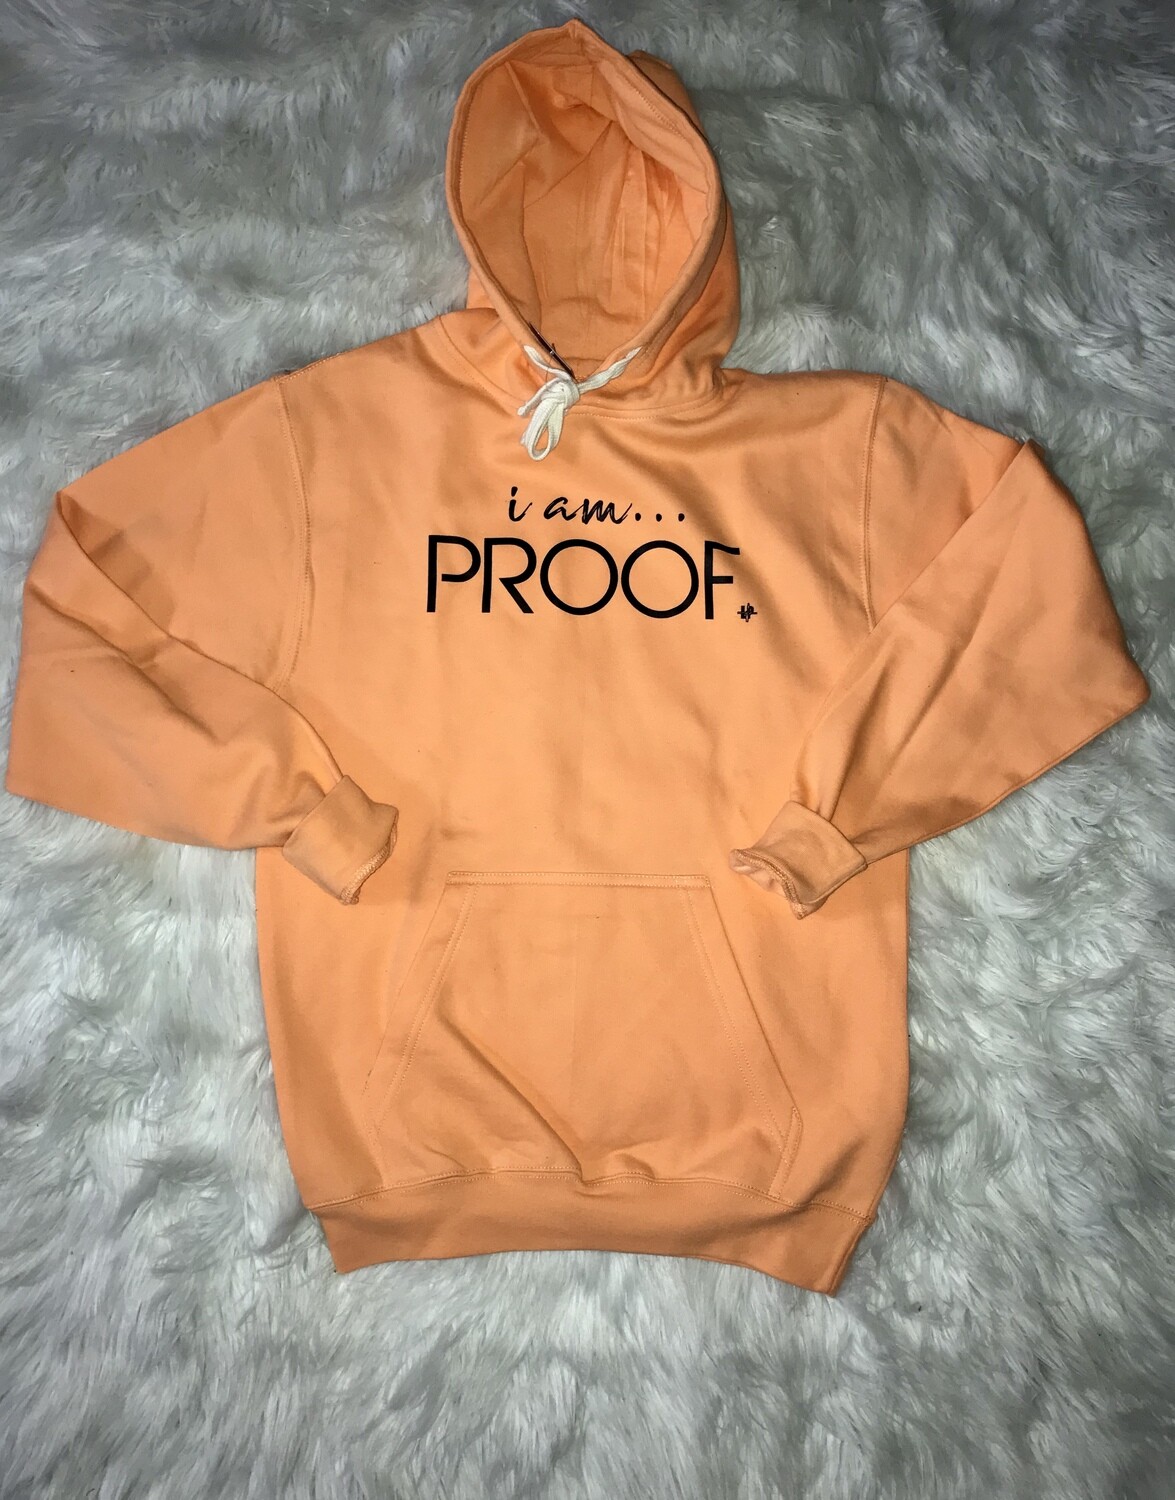 “i am PROOF” Spring Hoodies (click on photo to view available colors)